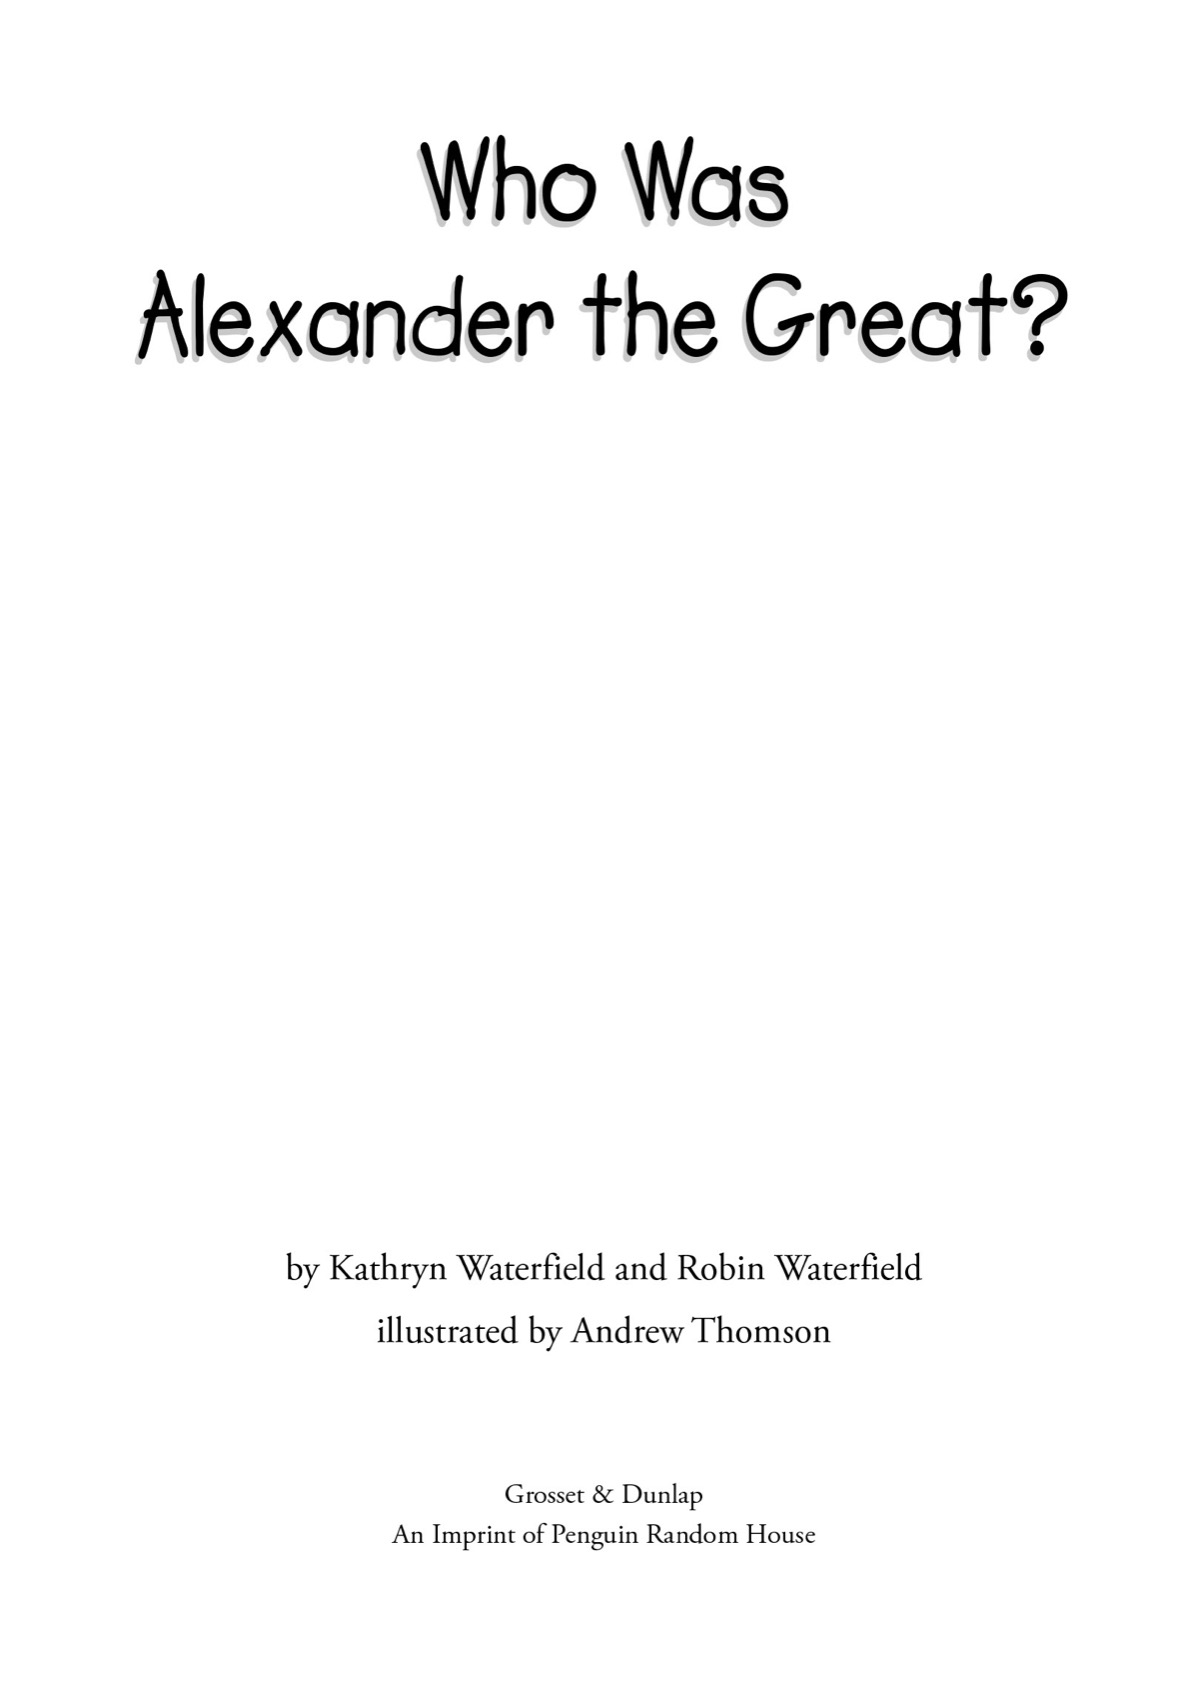 Who Was Alexander the Great - image 2